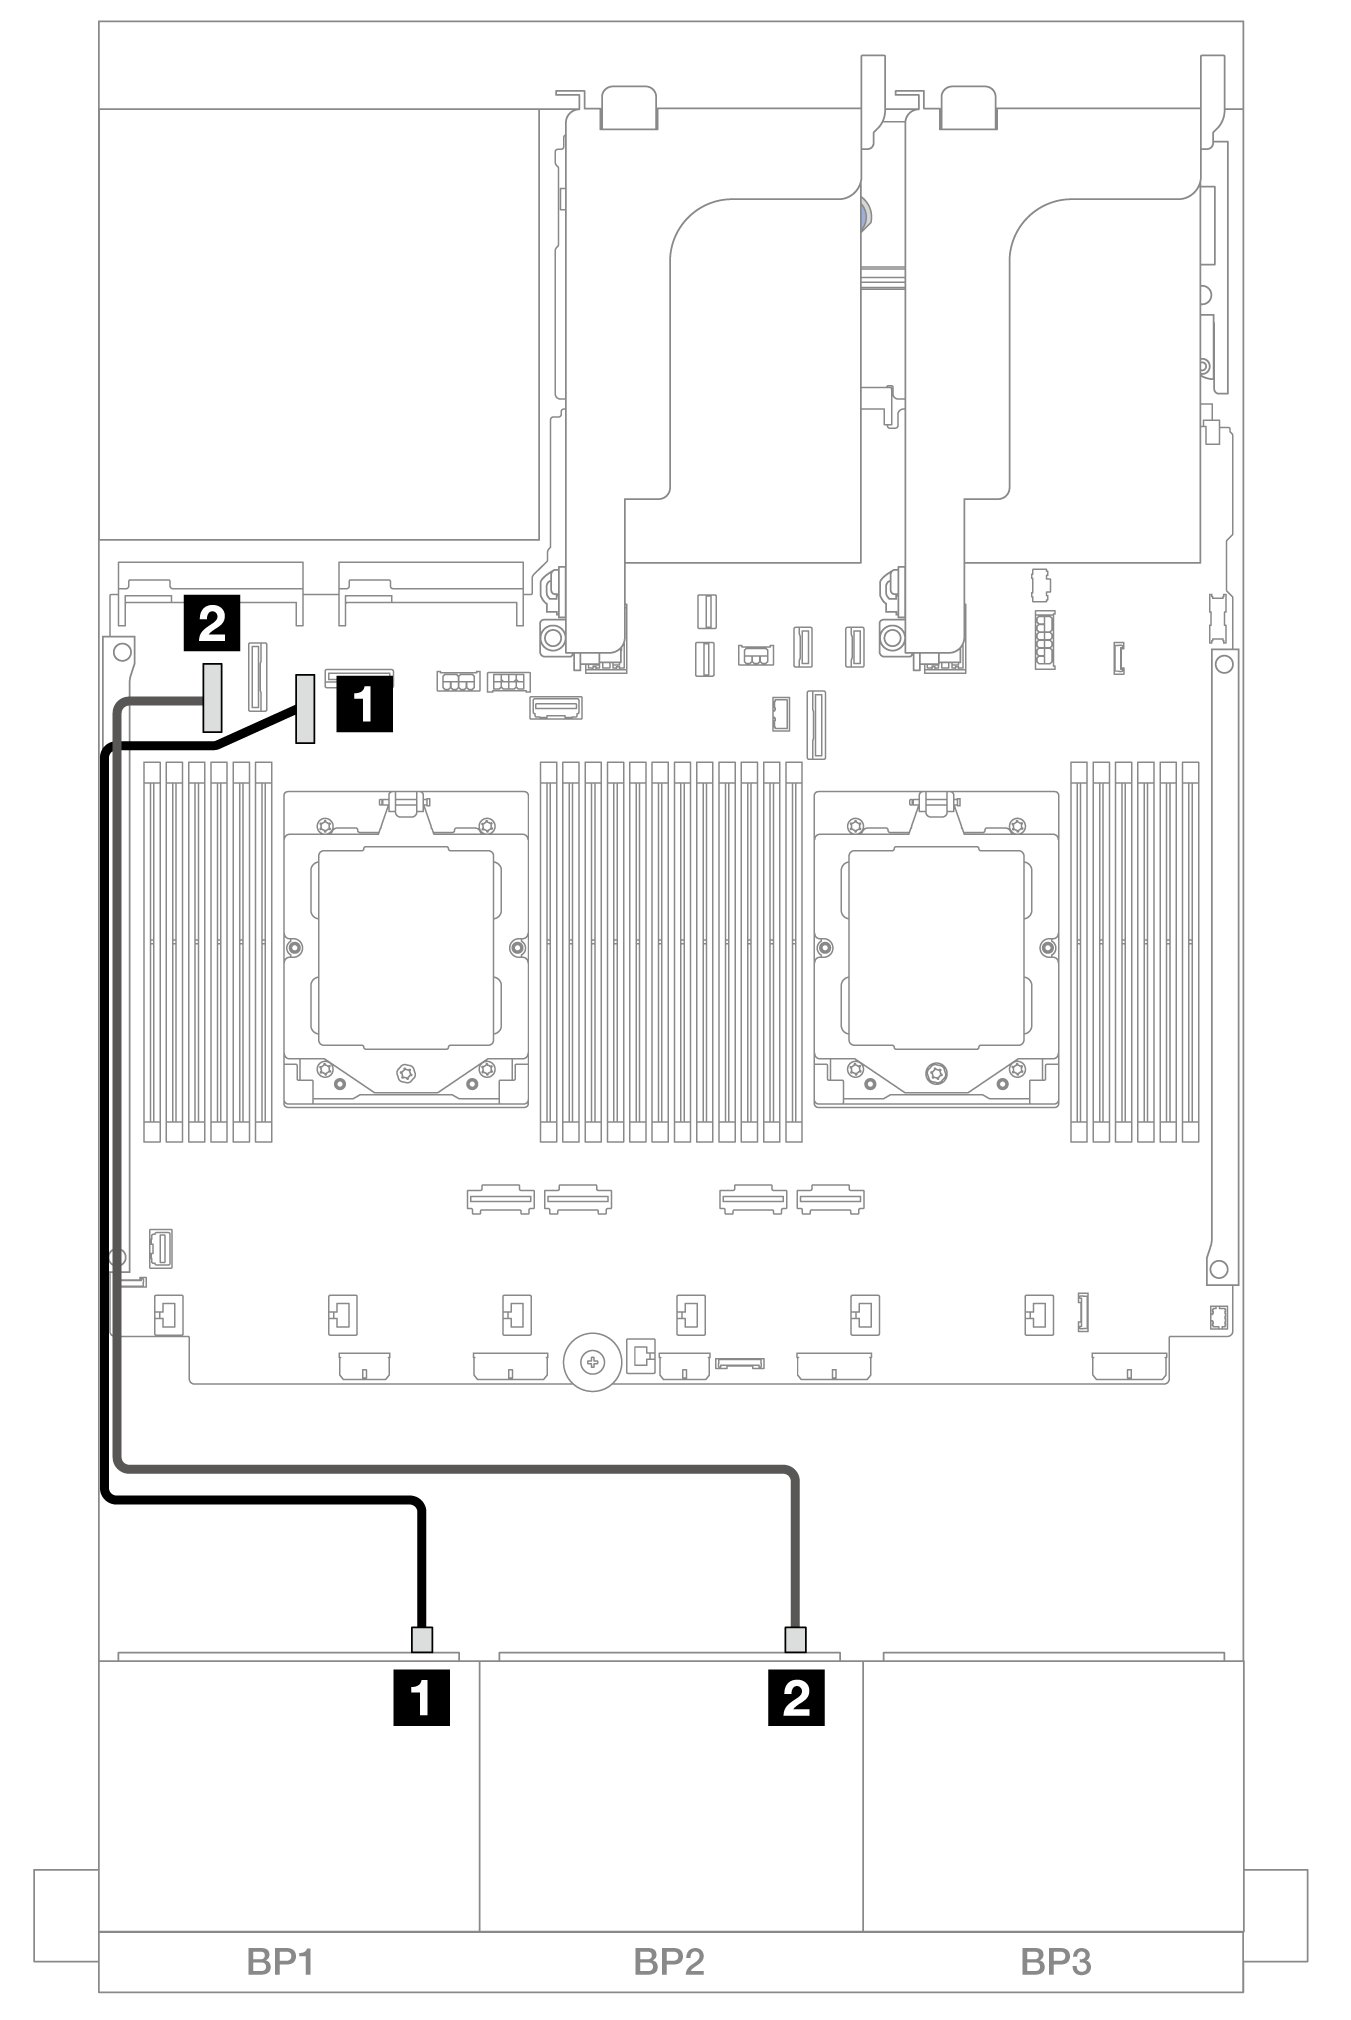 Cable routing when two processors installed